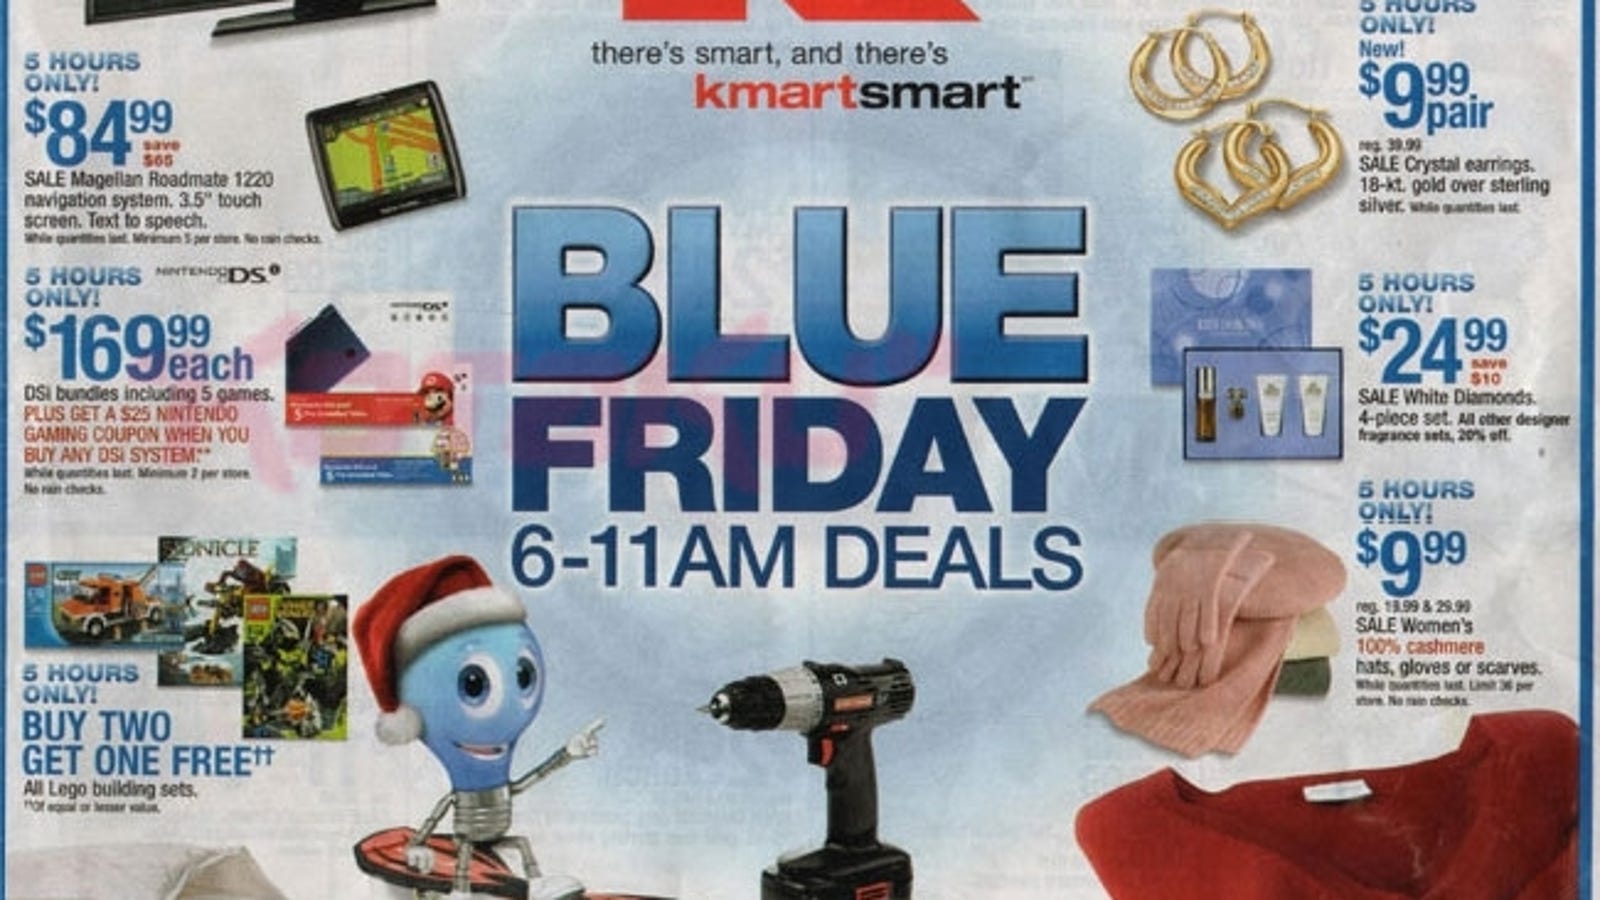 A Look At Kmart's Black Friday Game Sales